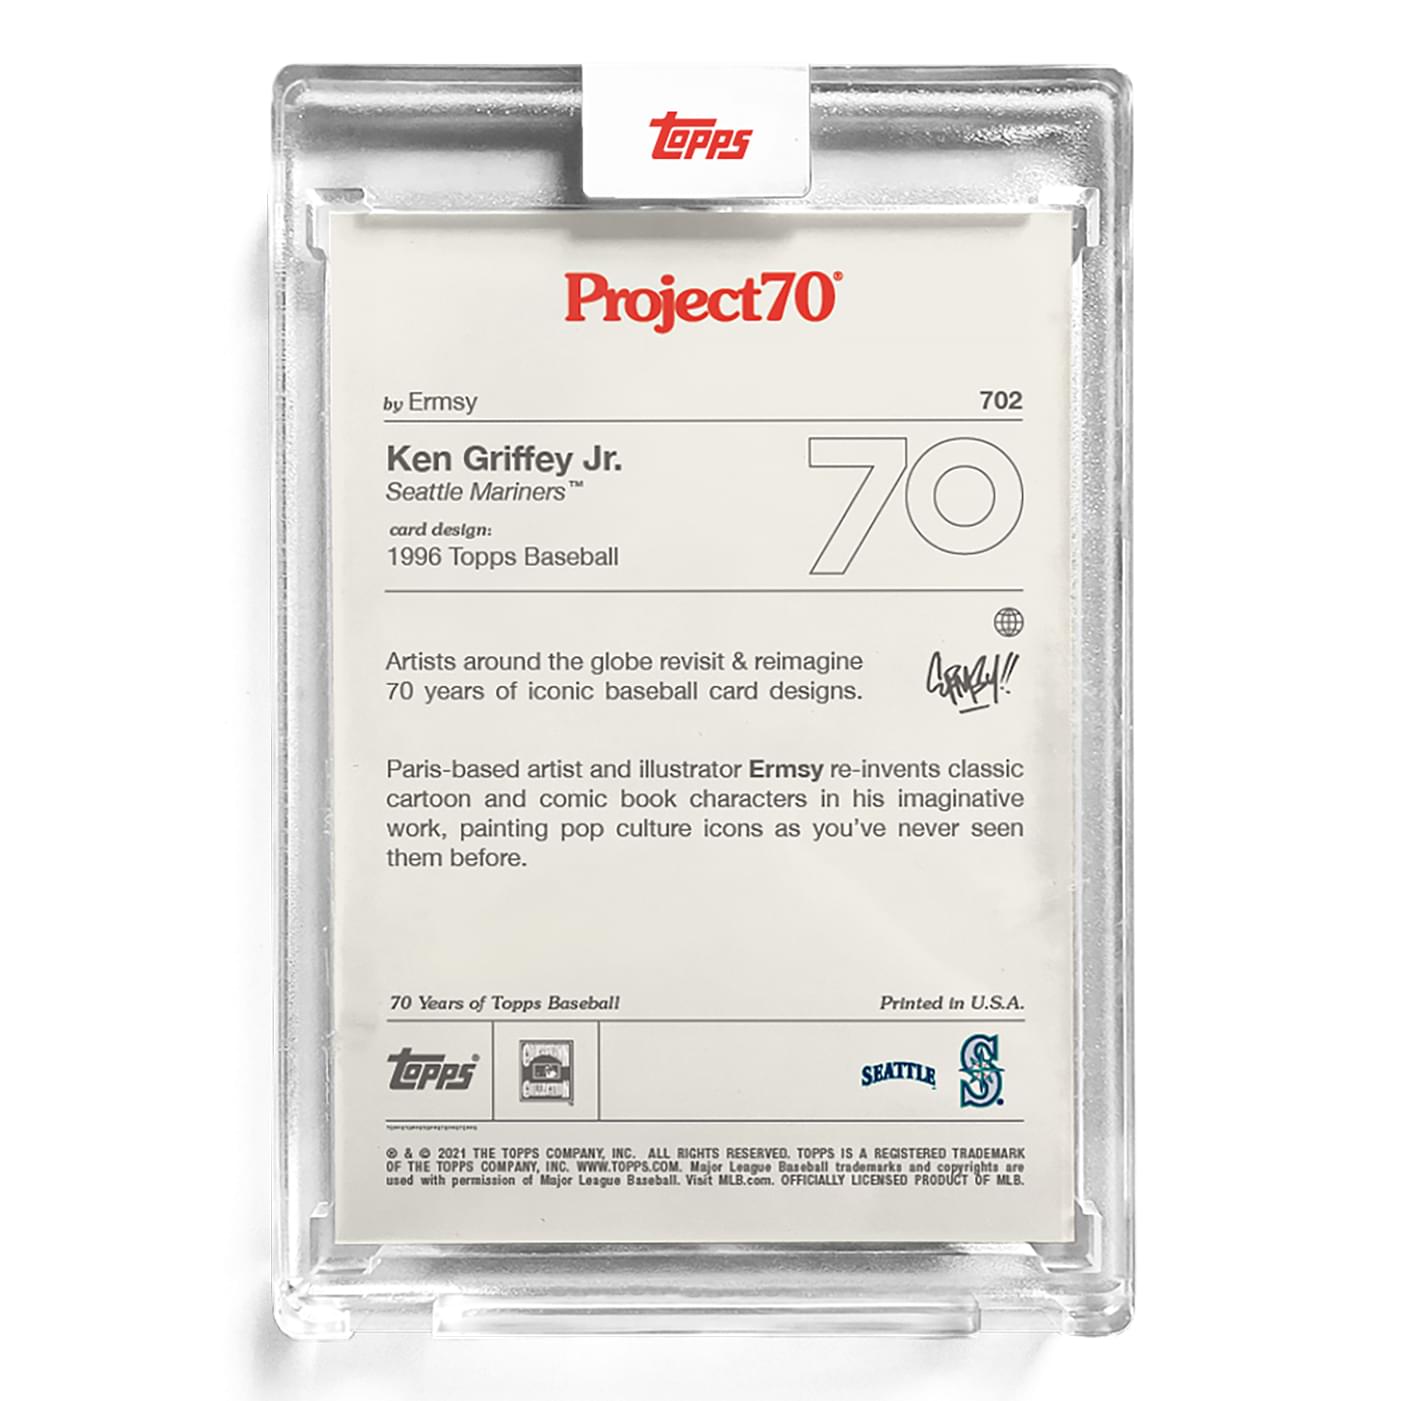 Topps Project70 Card 702 | Ken Griffey Jr. by Ermsy